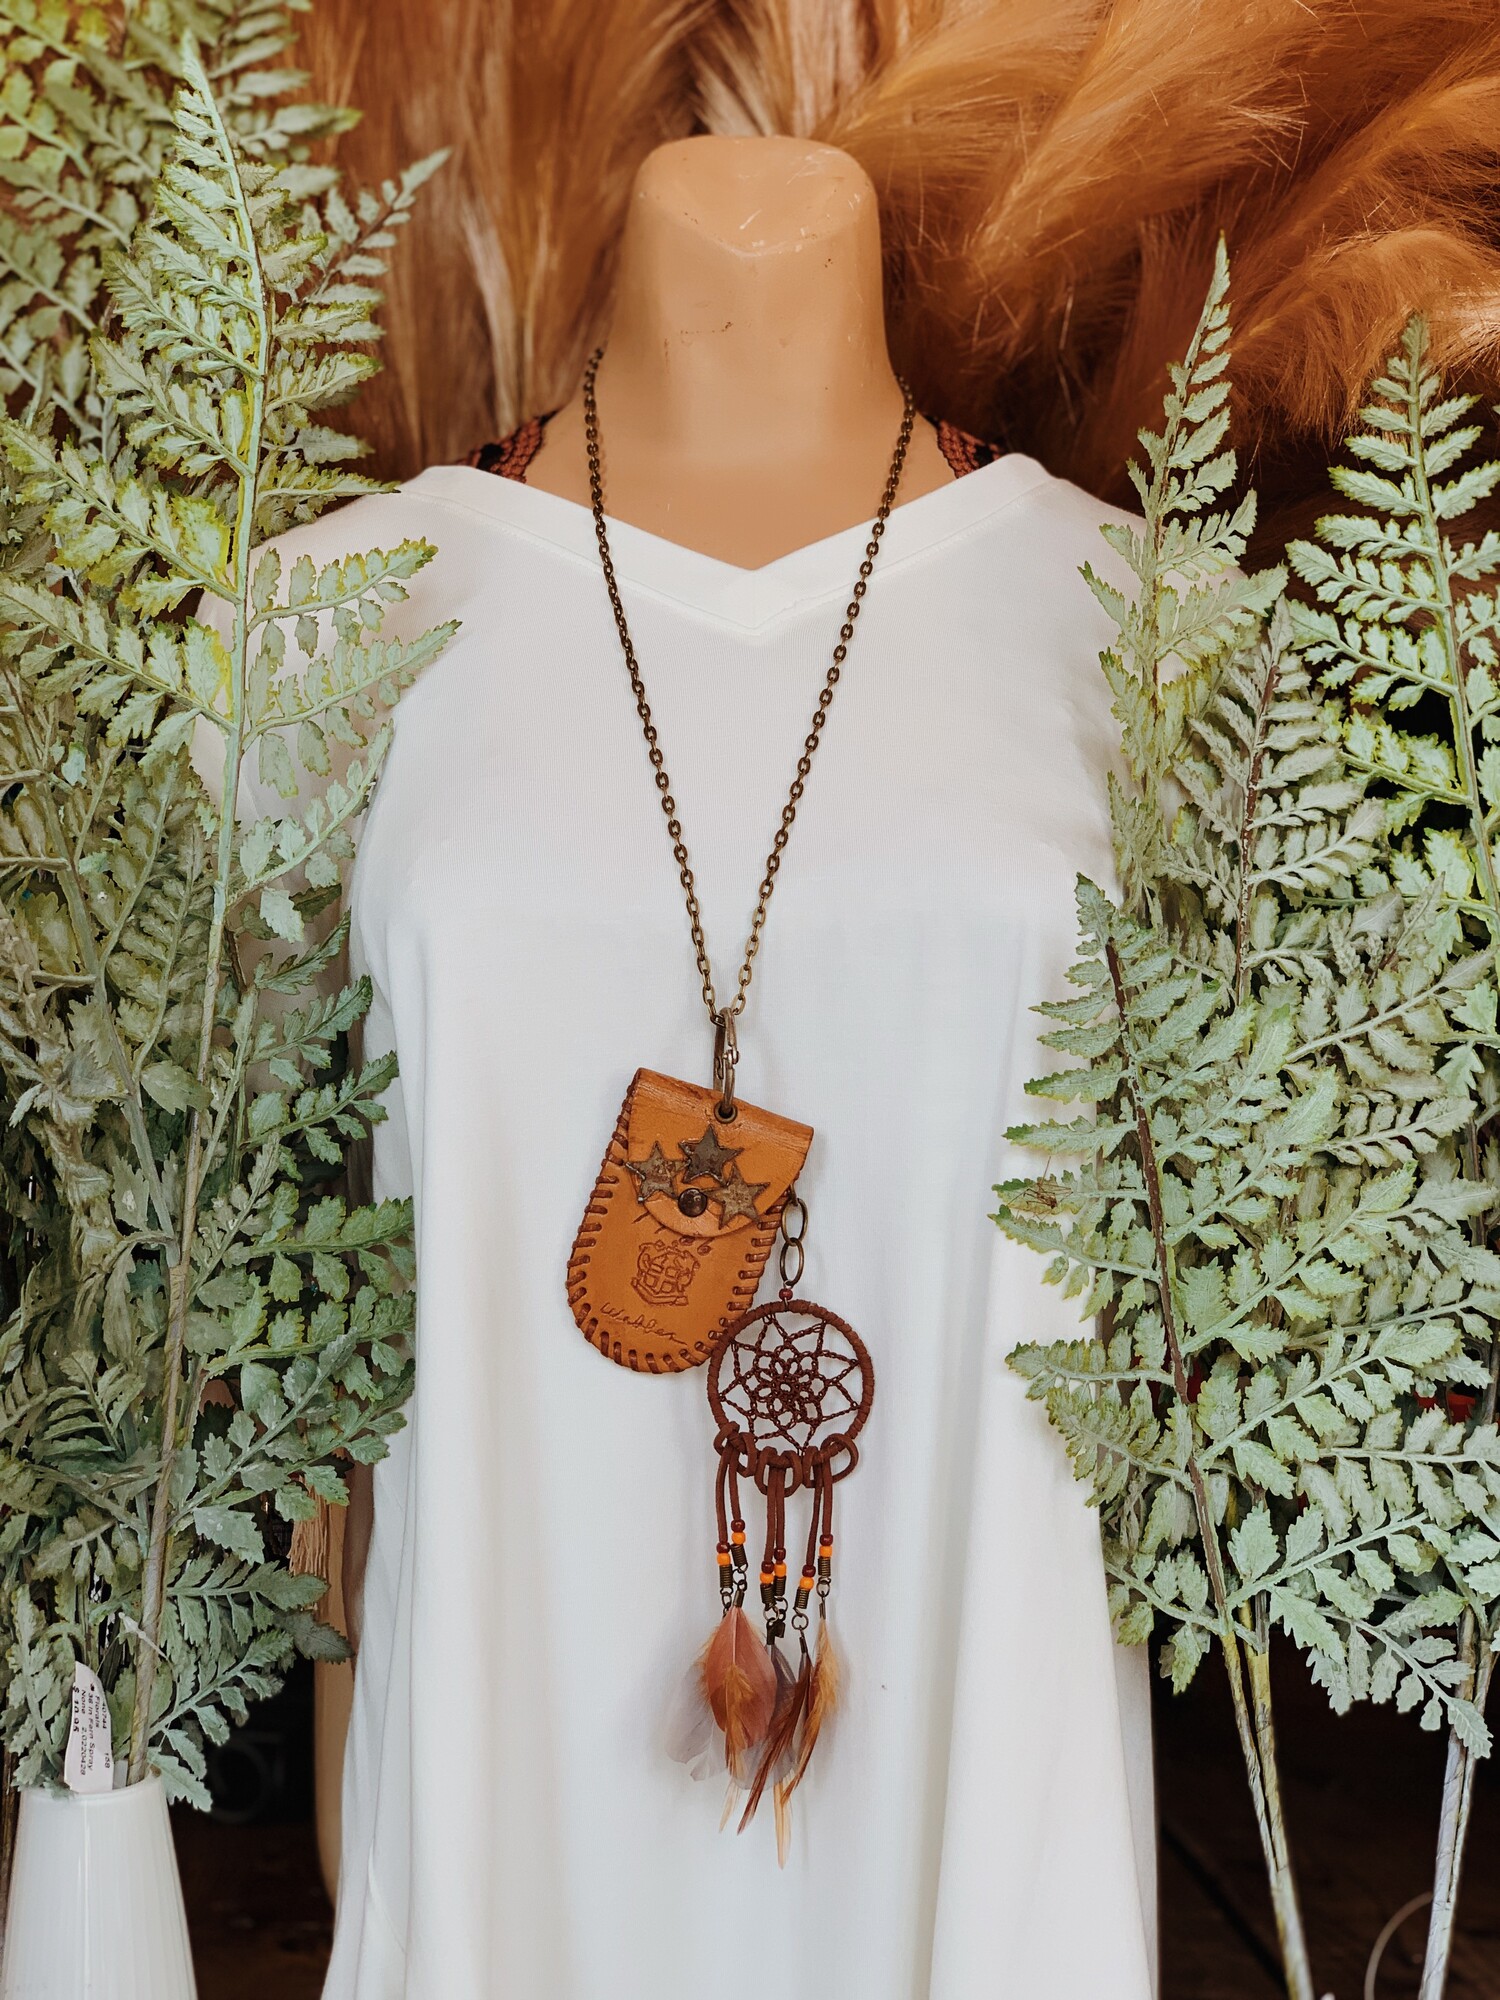 This one of a kind, handmade necklace is on a 28 inch chain and has a leather pouch as the pendant with a feather dream catcher hanging from it!